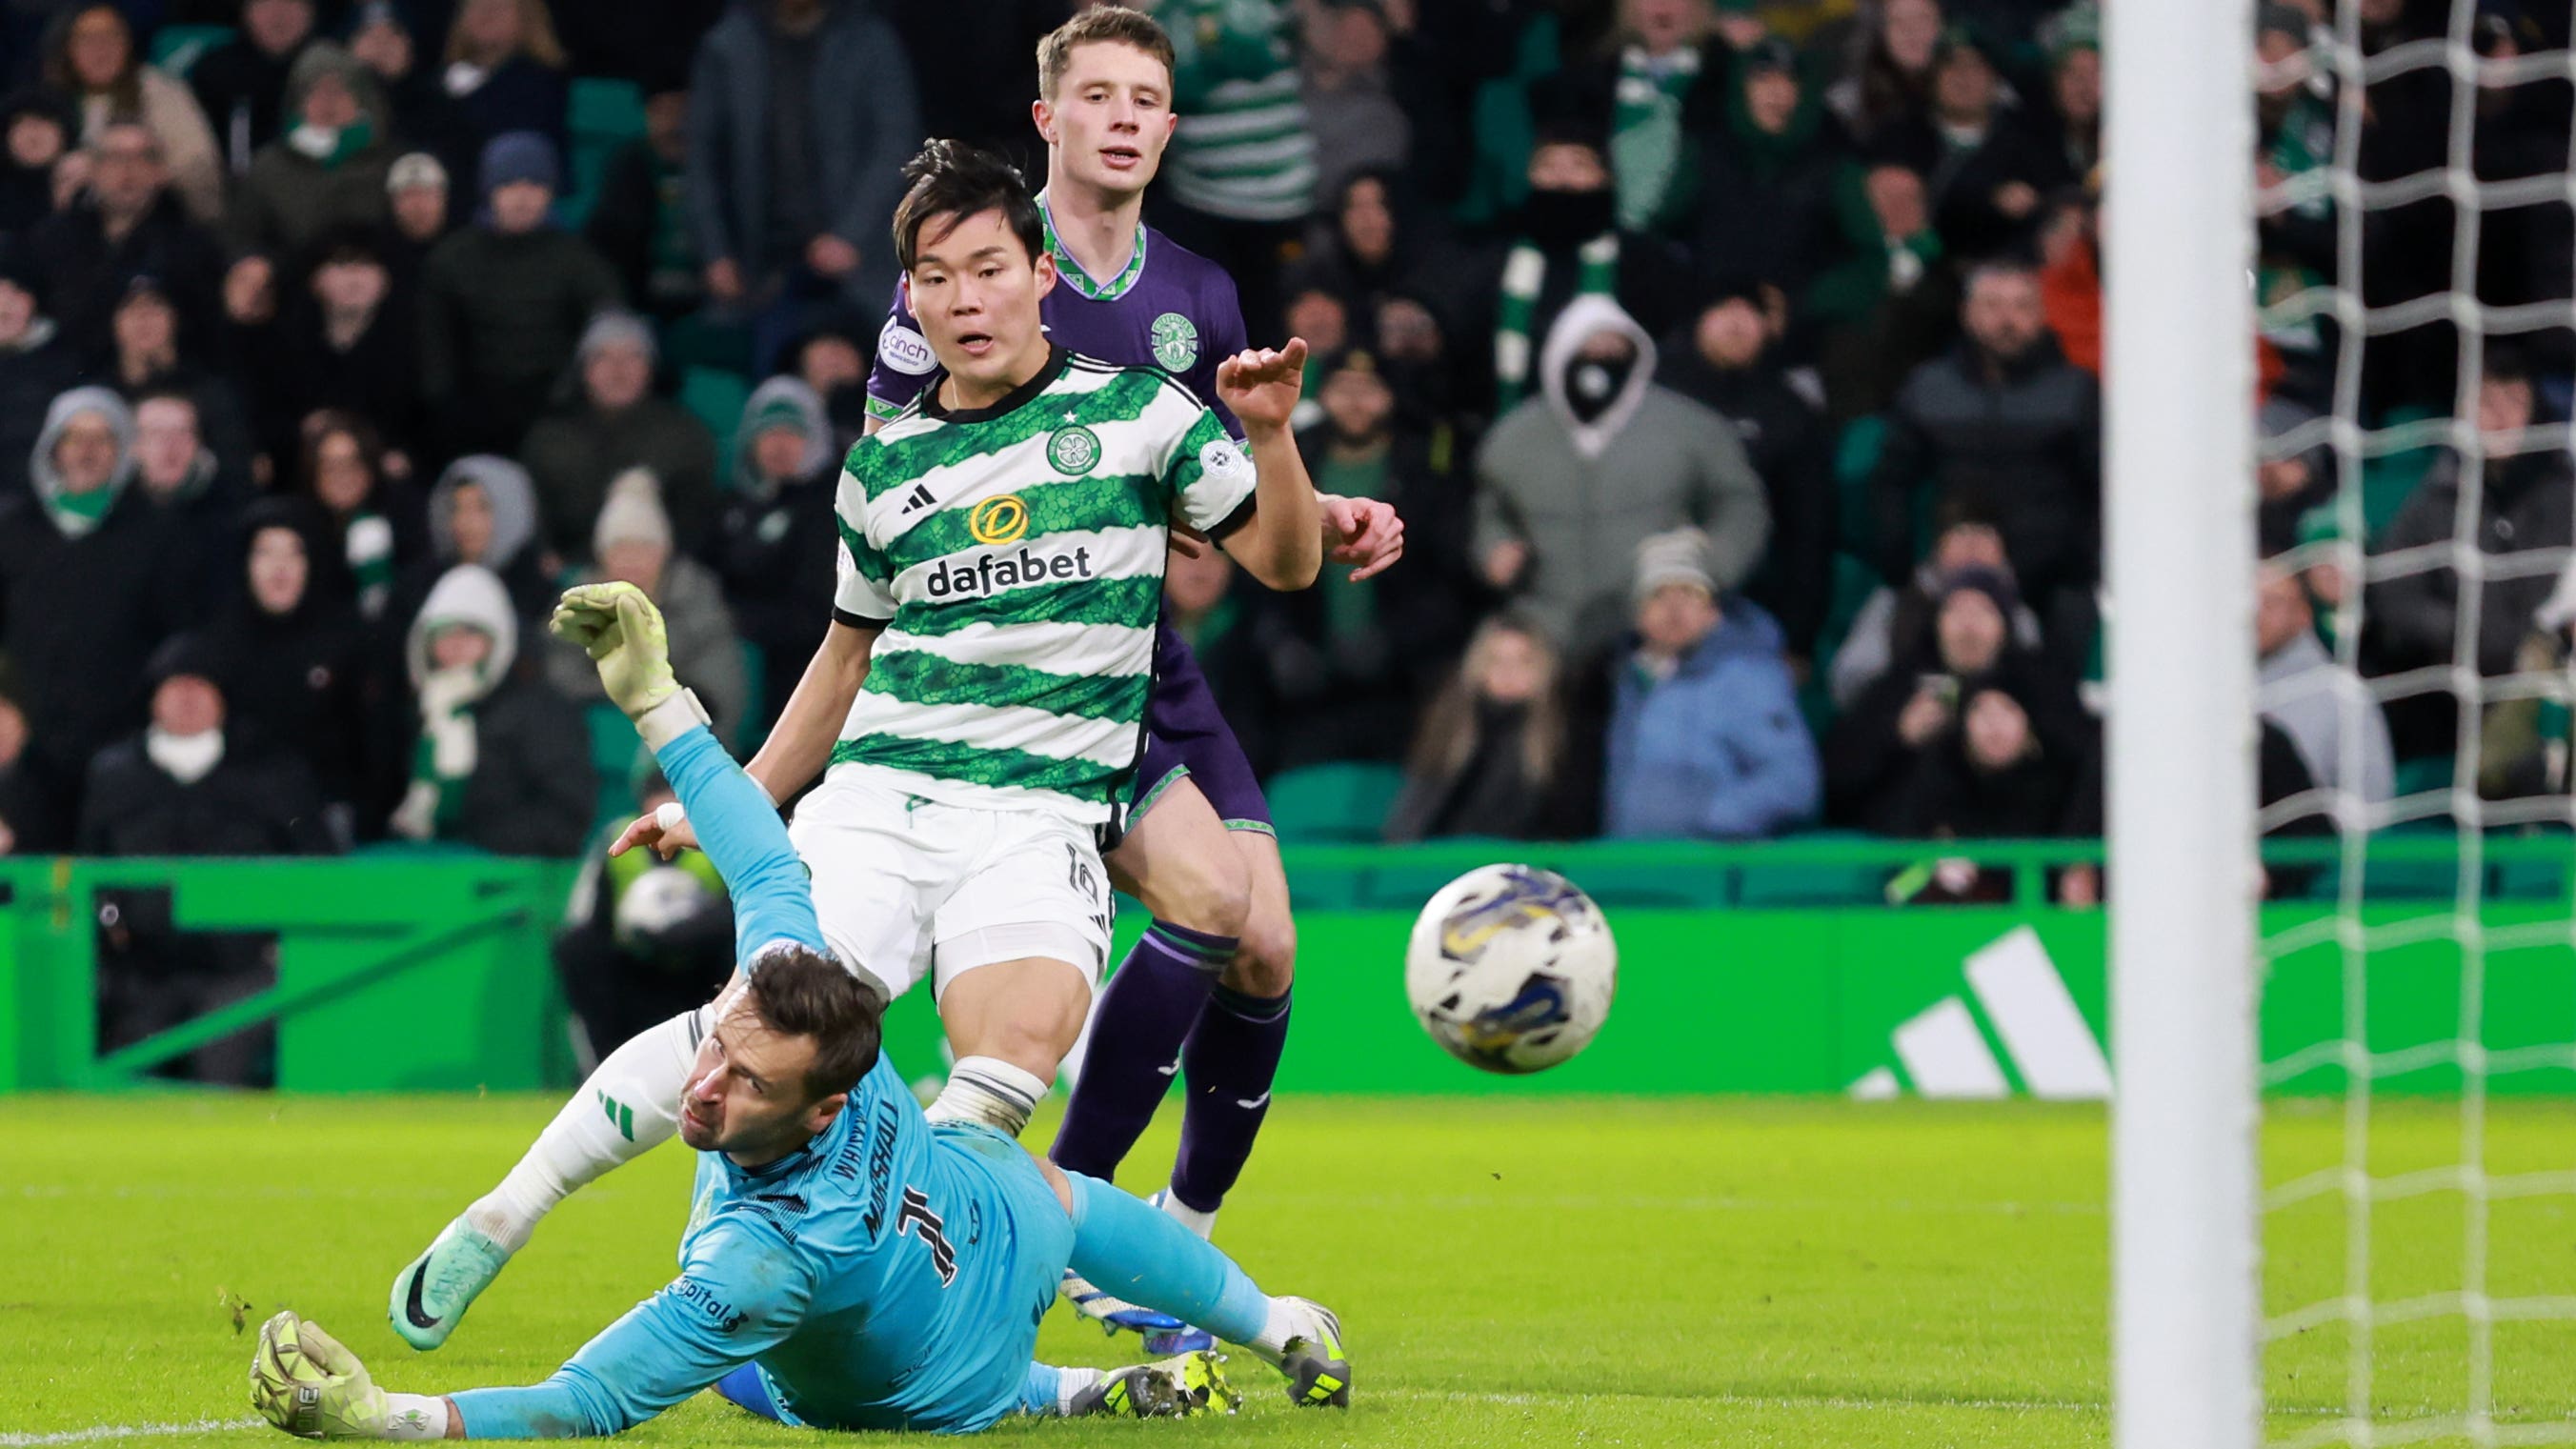 Oh Hyeon-gyu pleased to grasp opportunity on rare Celtic start with Hibs brace